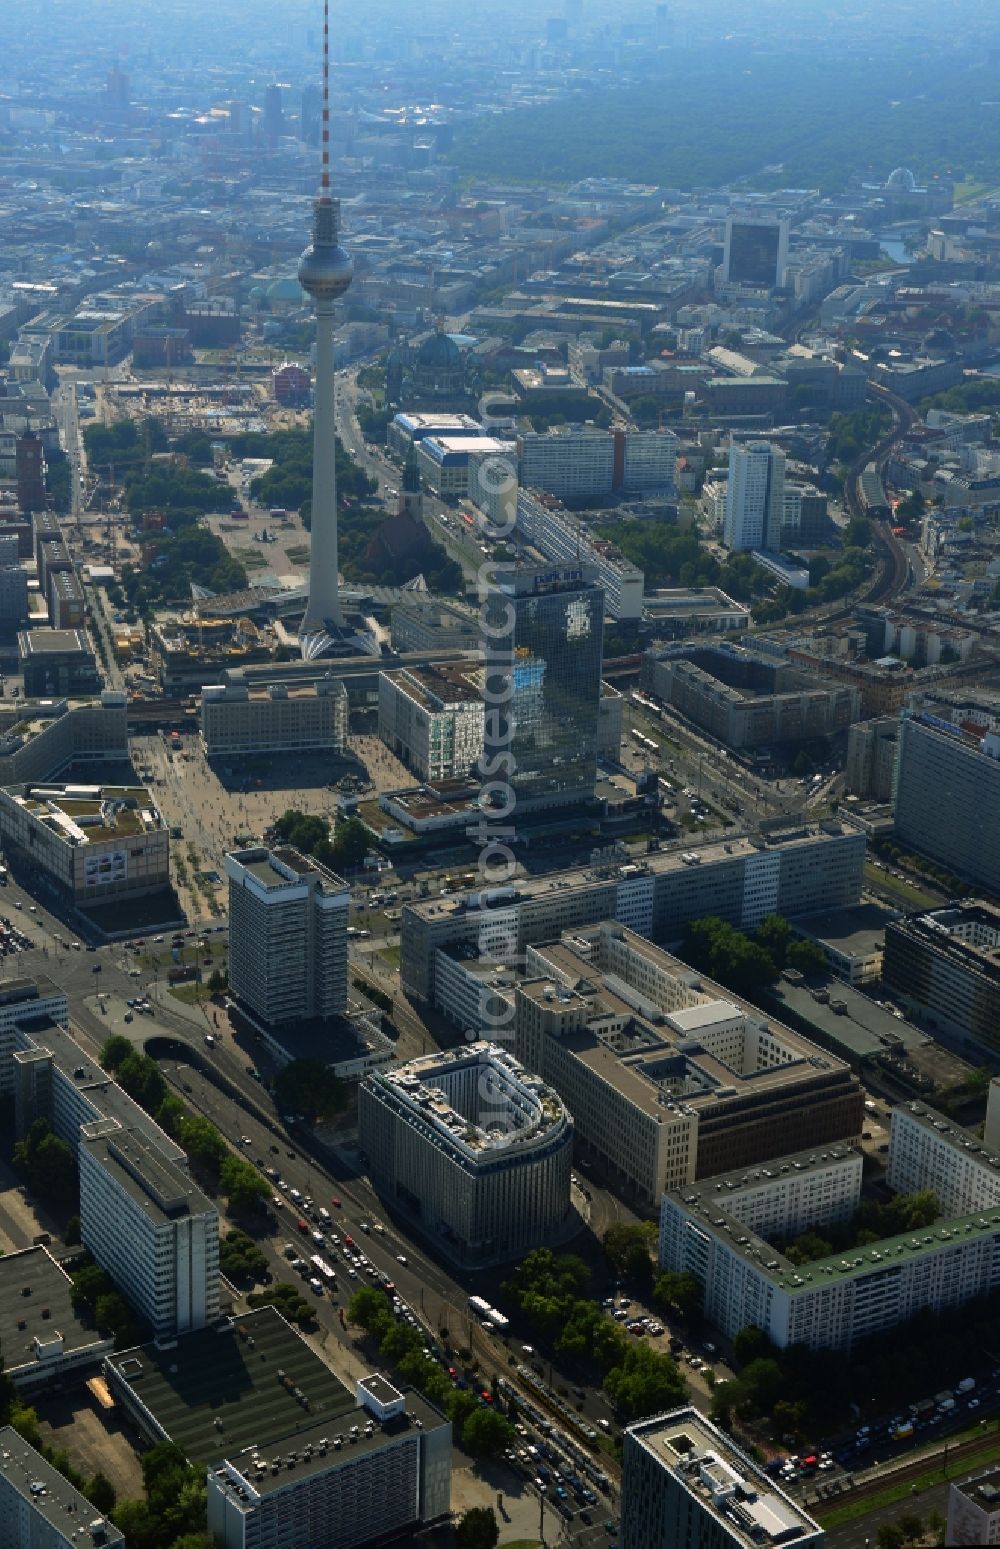 Berlin from above - City view from the town center east at Alexanderplatz in Mitte district of Berlin